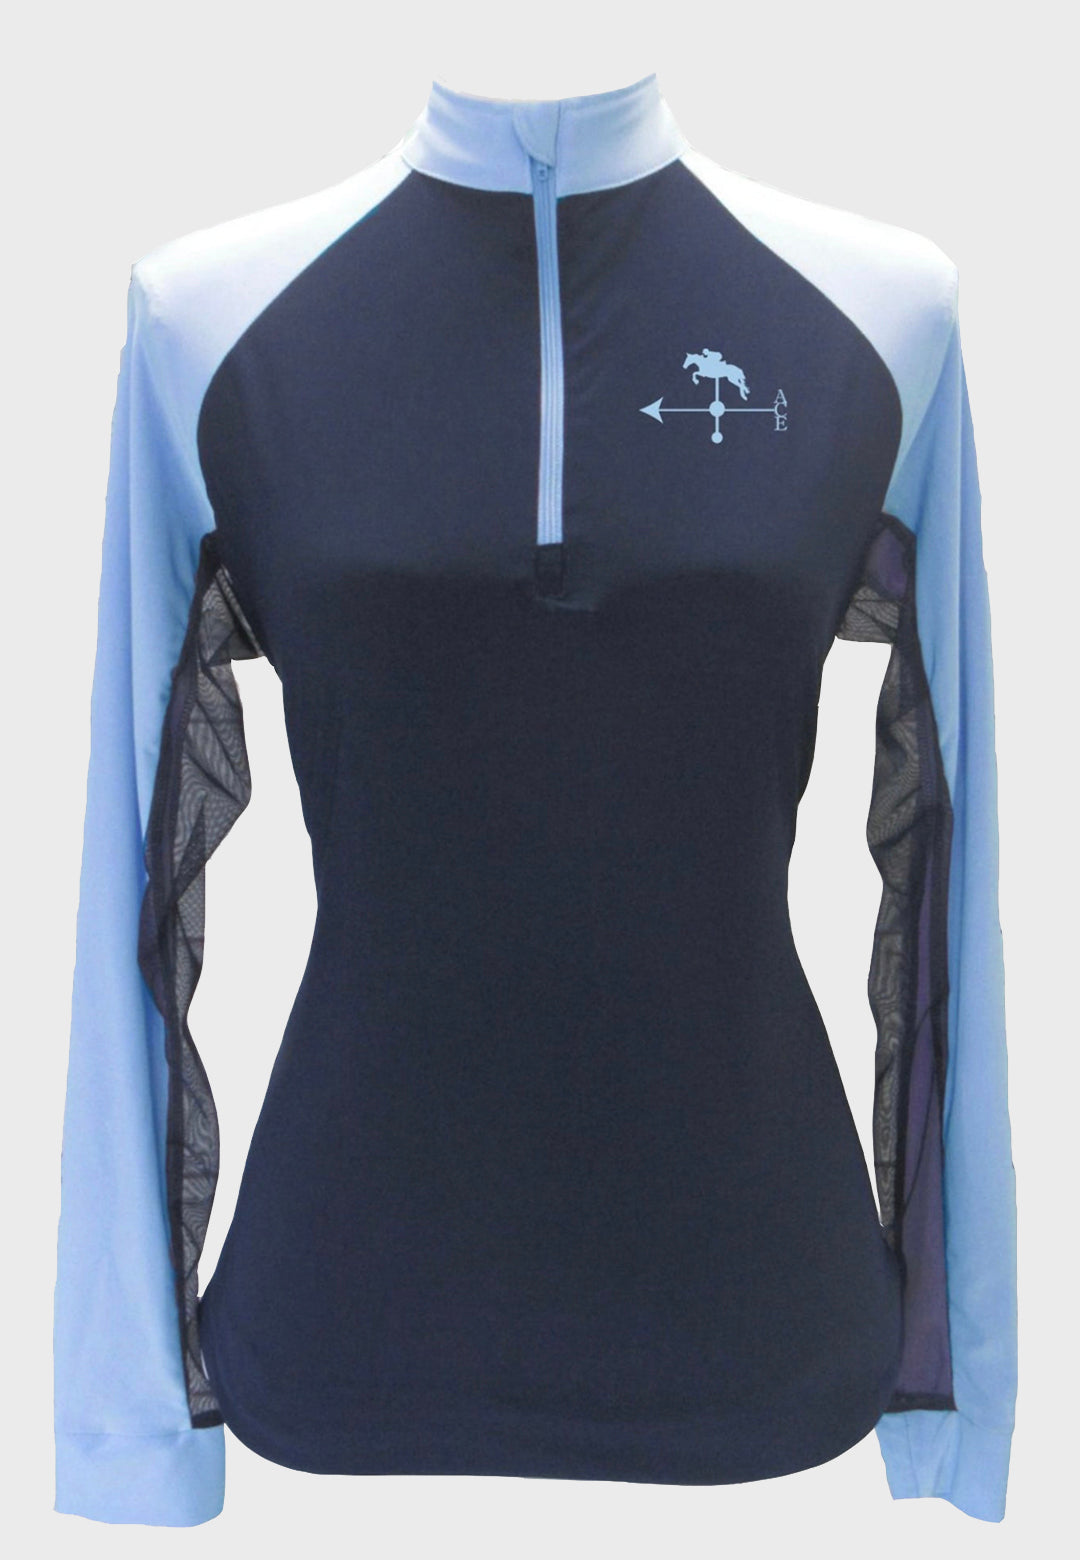 ACE Equestrian Navy/Baby Blue Custom Sun Shirt - Adult + Youth Sizes